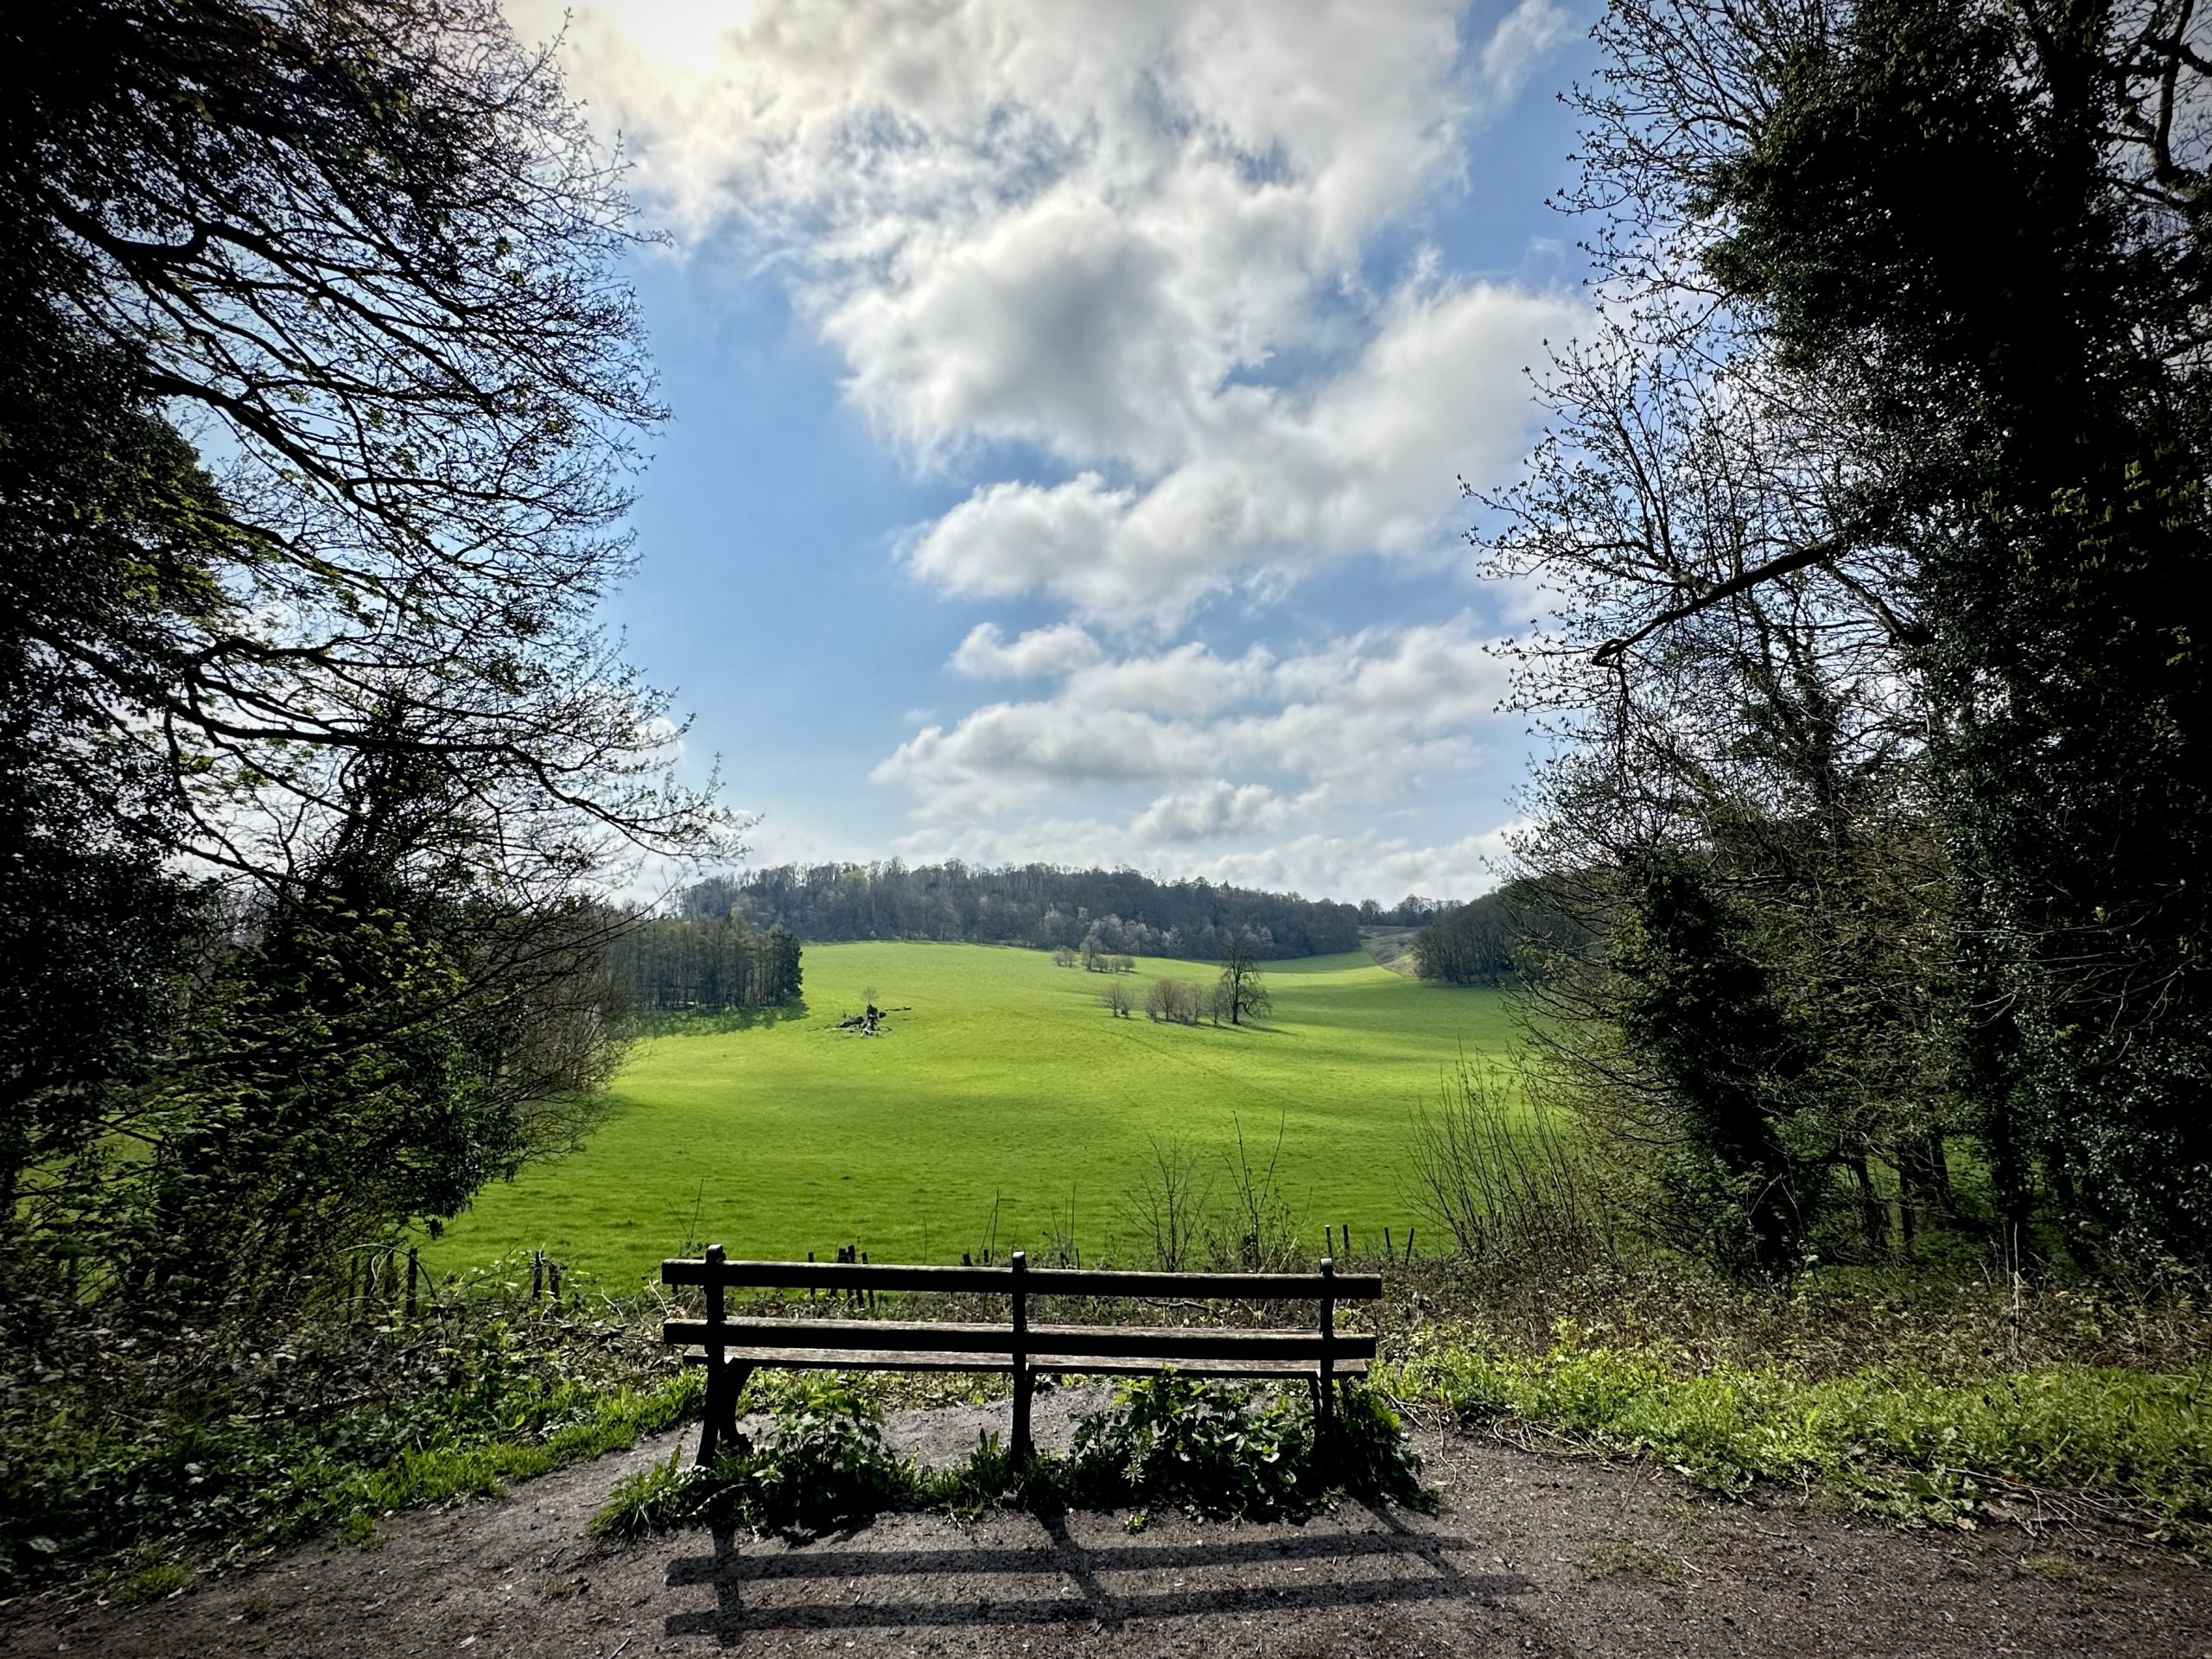 Day 105.4 – Reigate hill